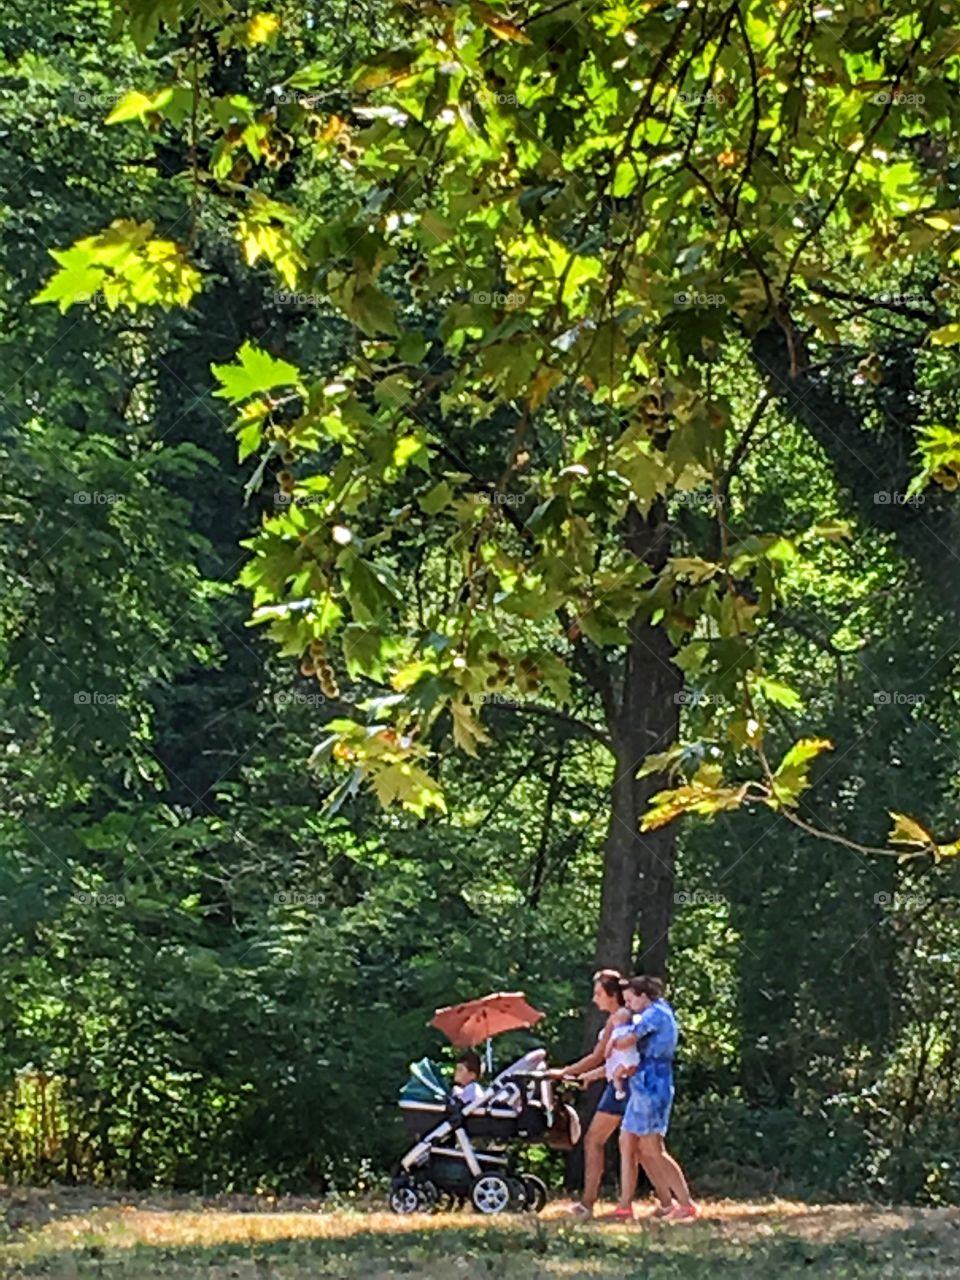 Mothers and children walking in the forest park